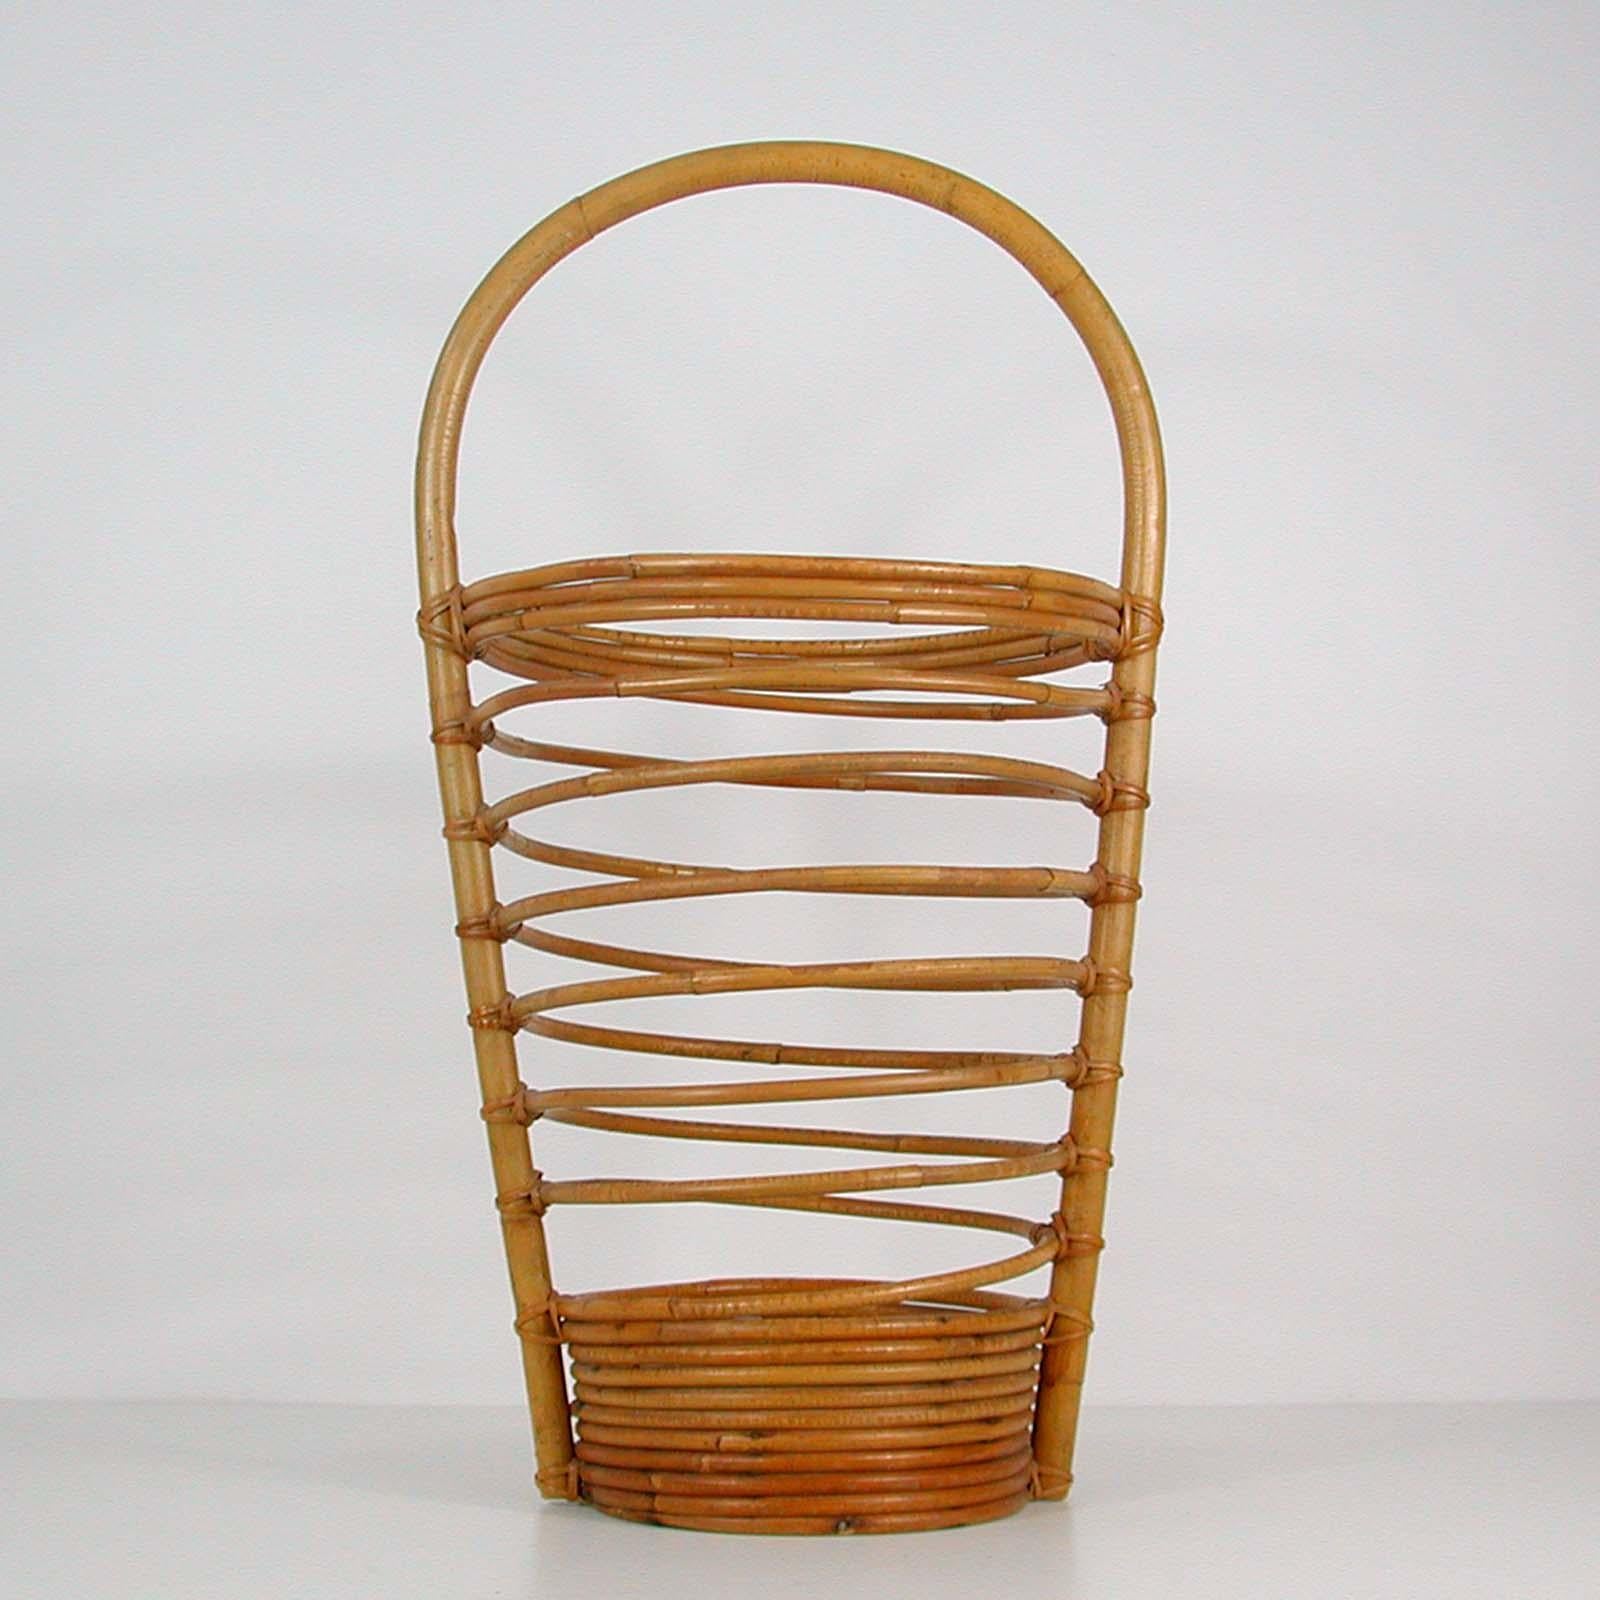 This beautiful loop umbrella stand was made in Italy in the 1960s. It is made of bamboo and wicker and has got a white ceramic bowl to the inside to catch the rain.